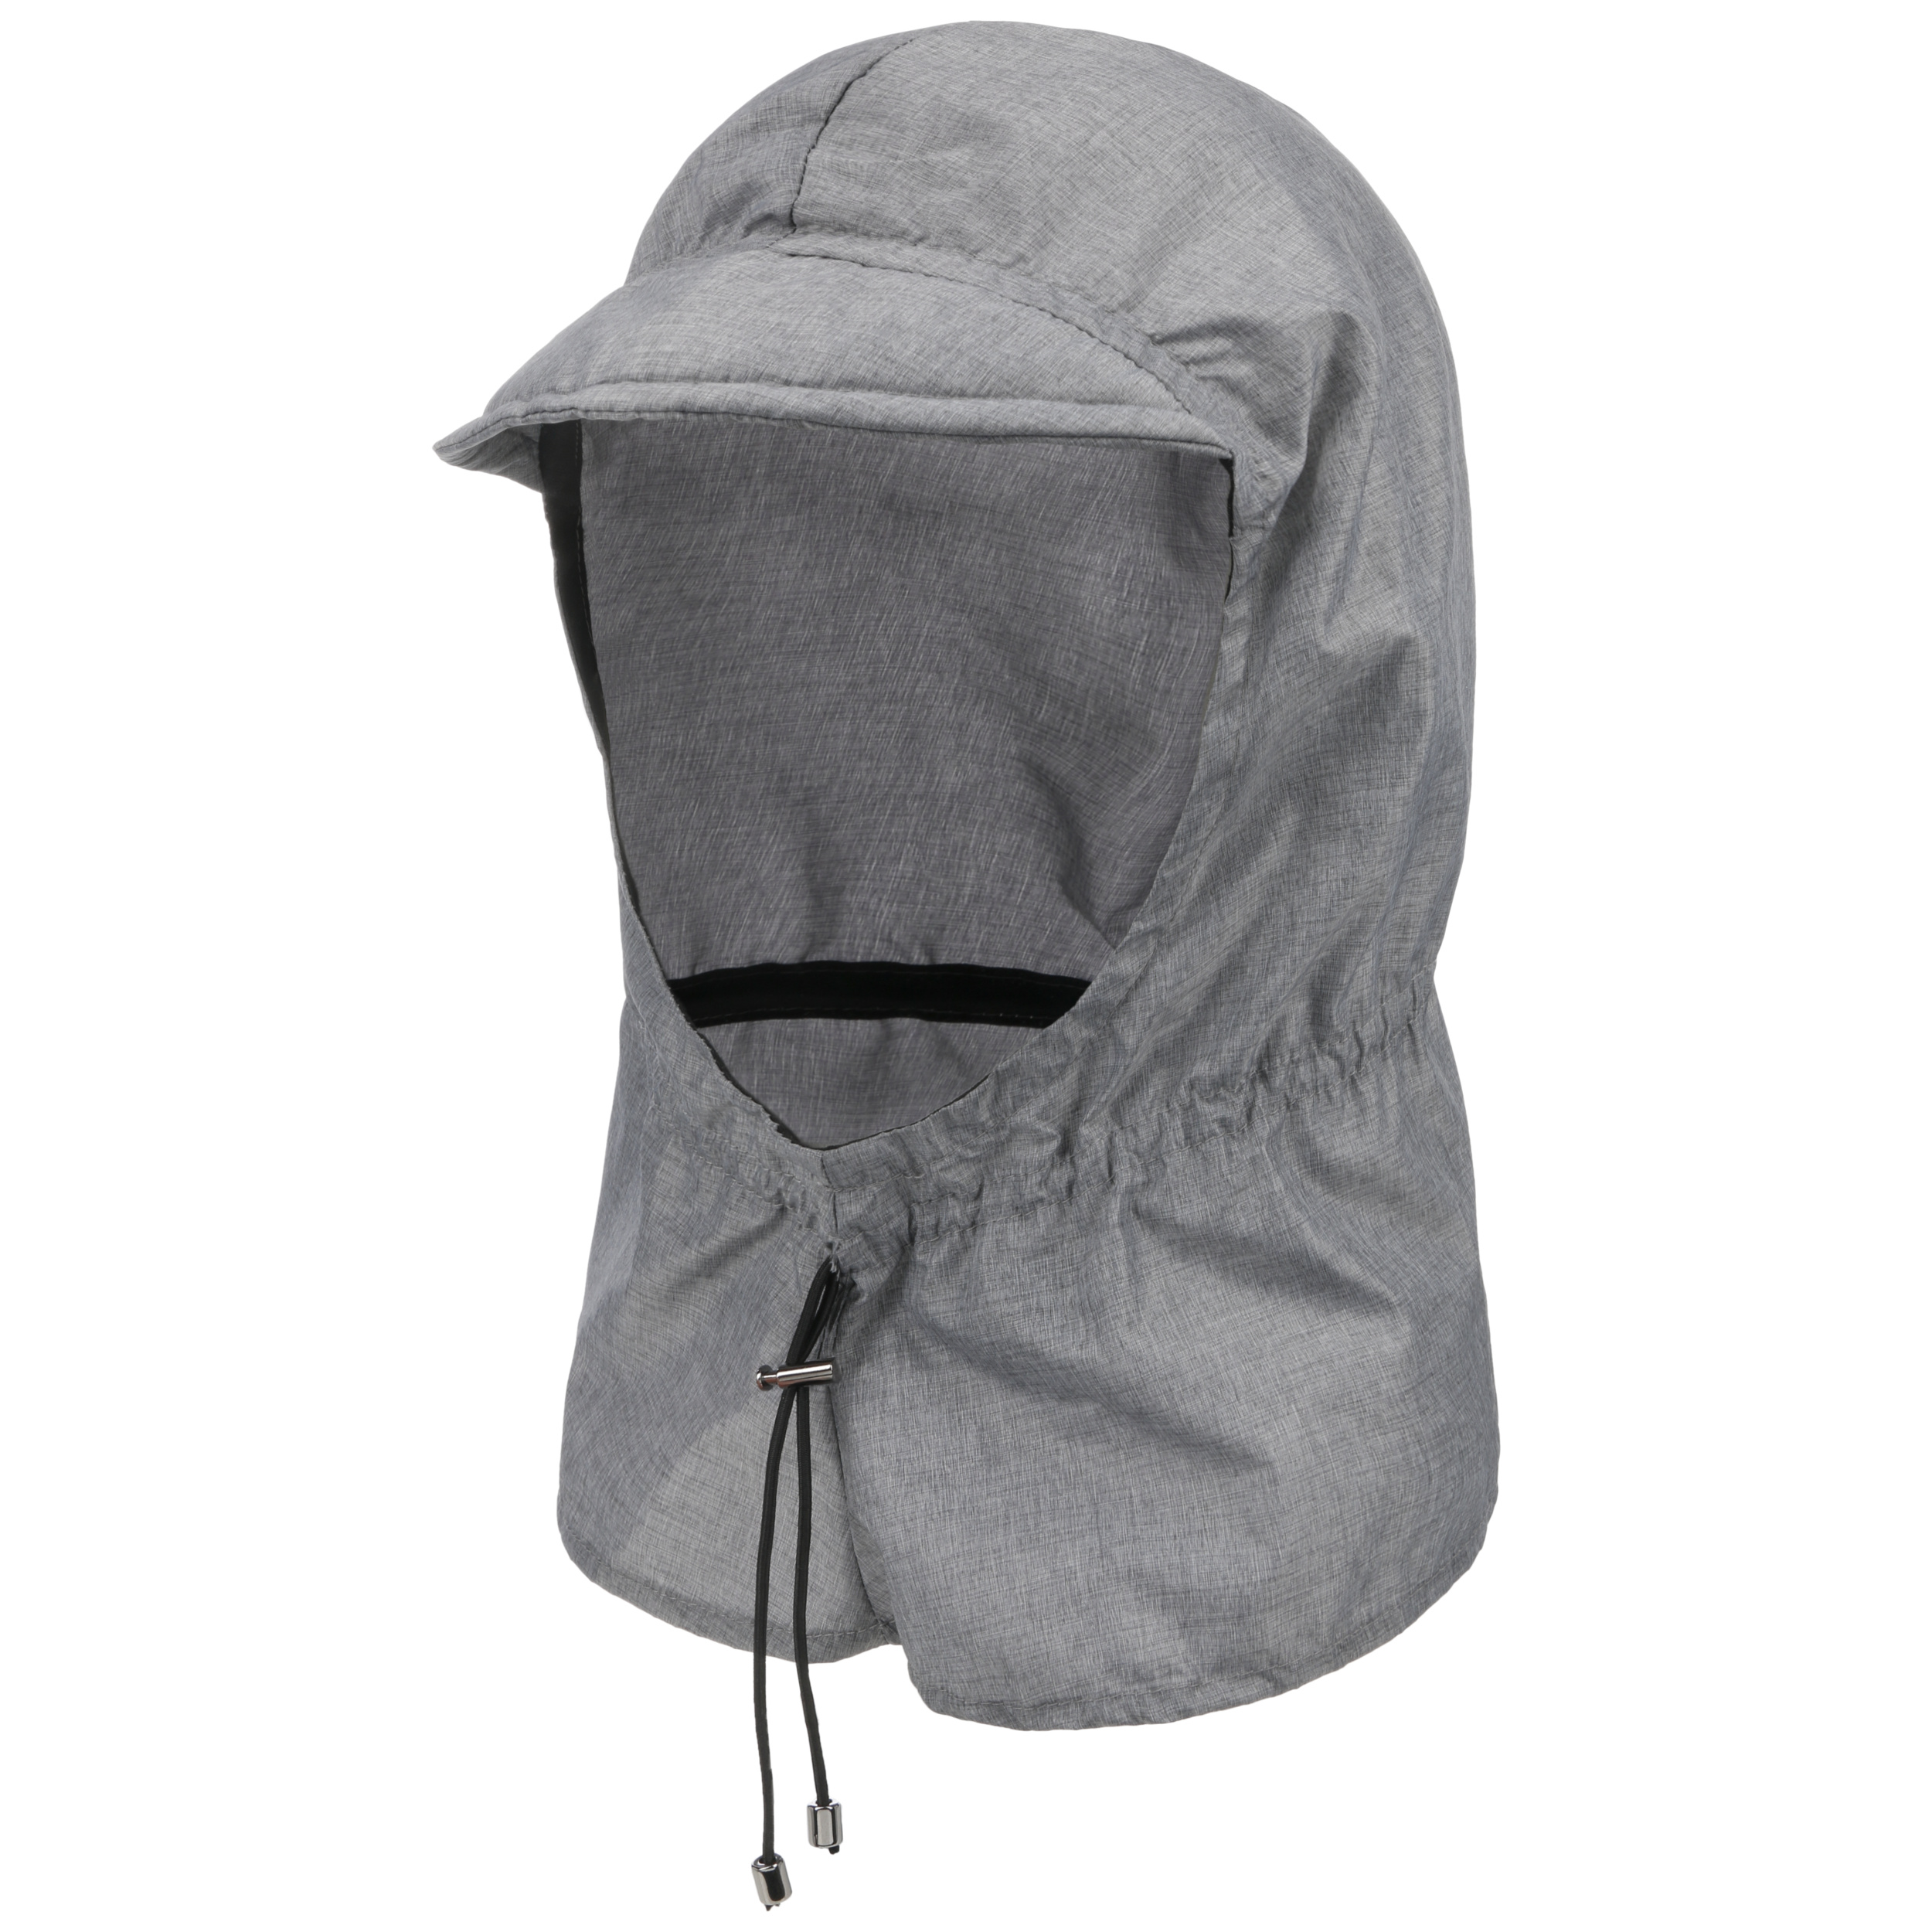 Packable Rain Protection Hood by Mayser - 79,95